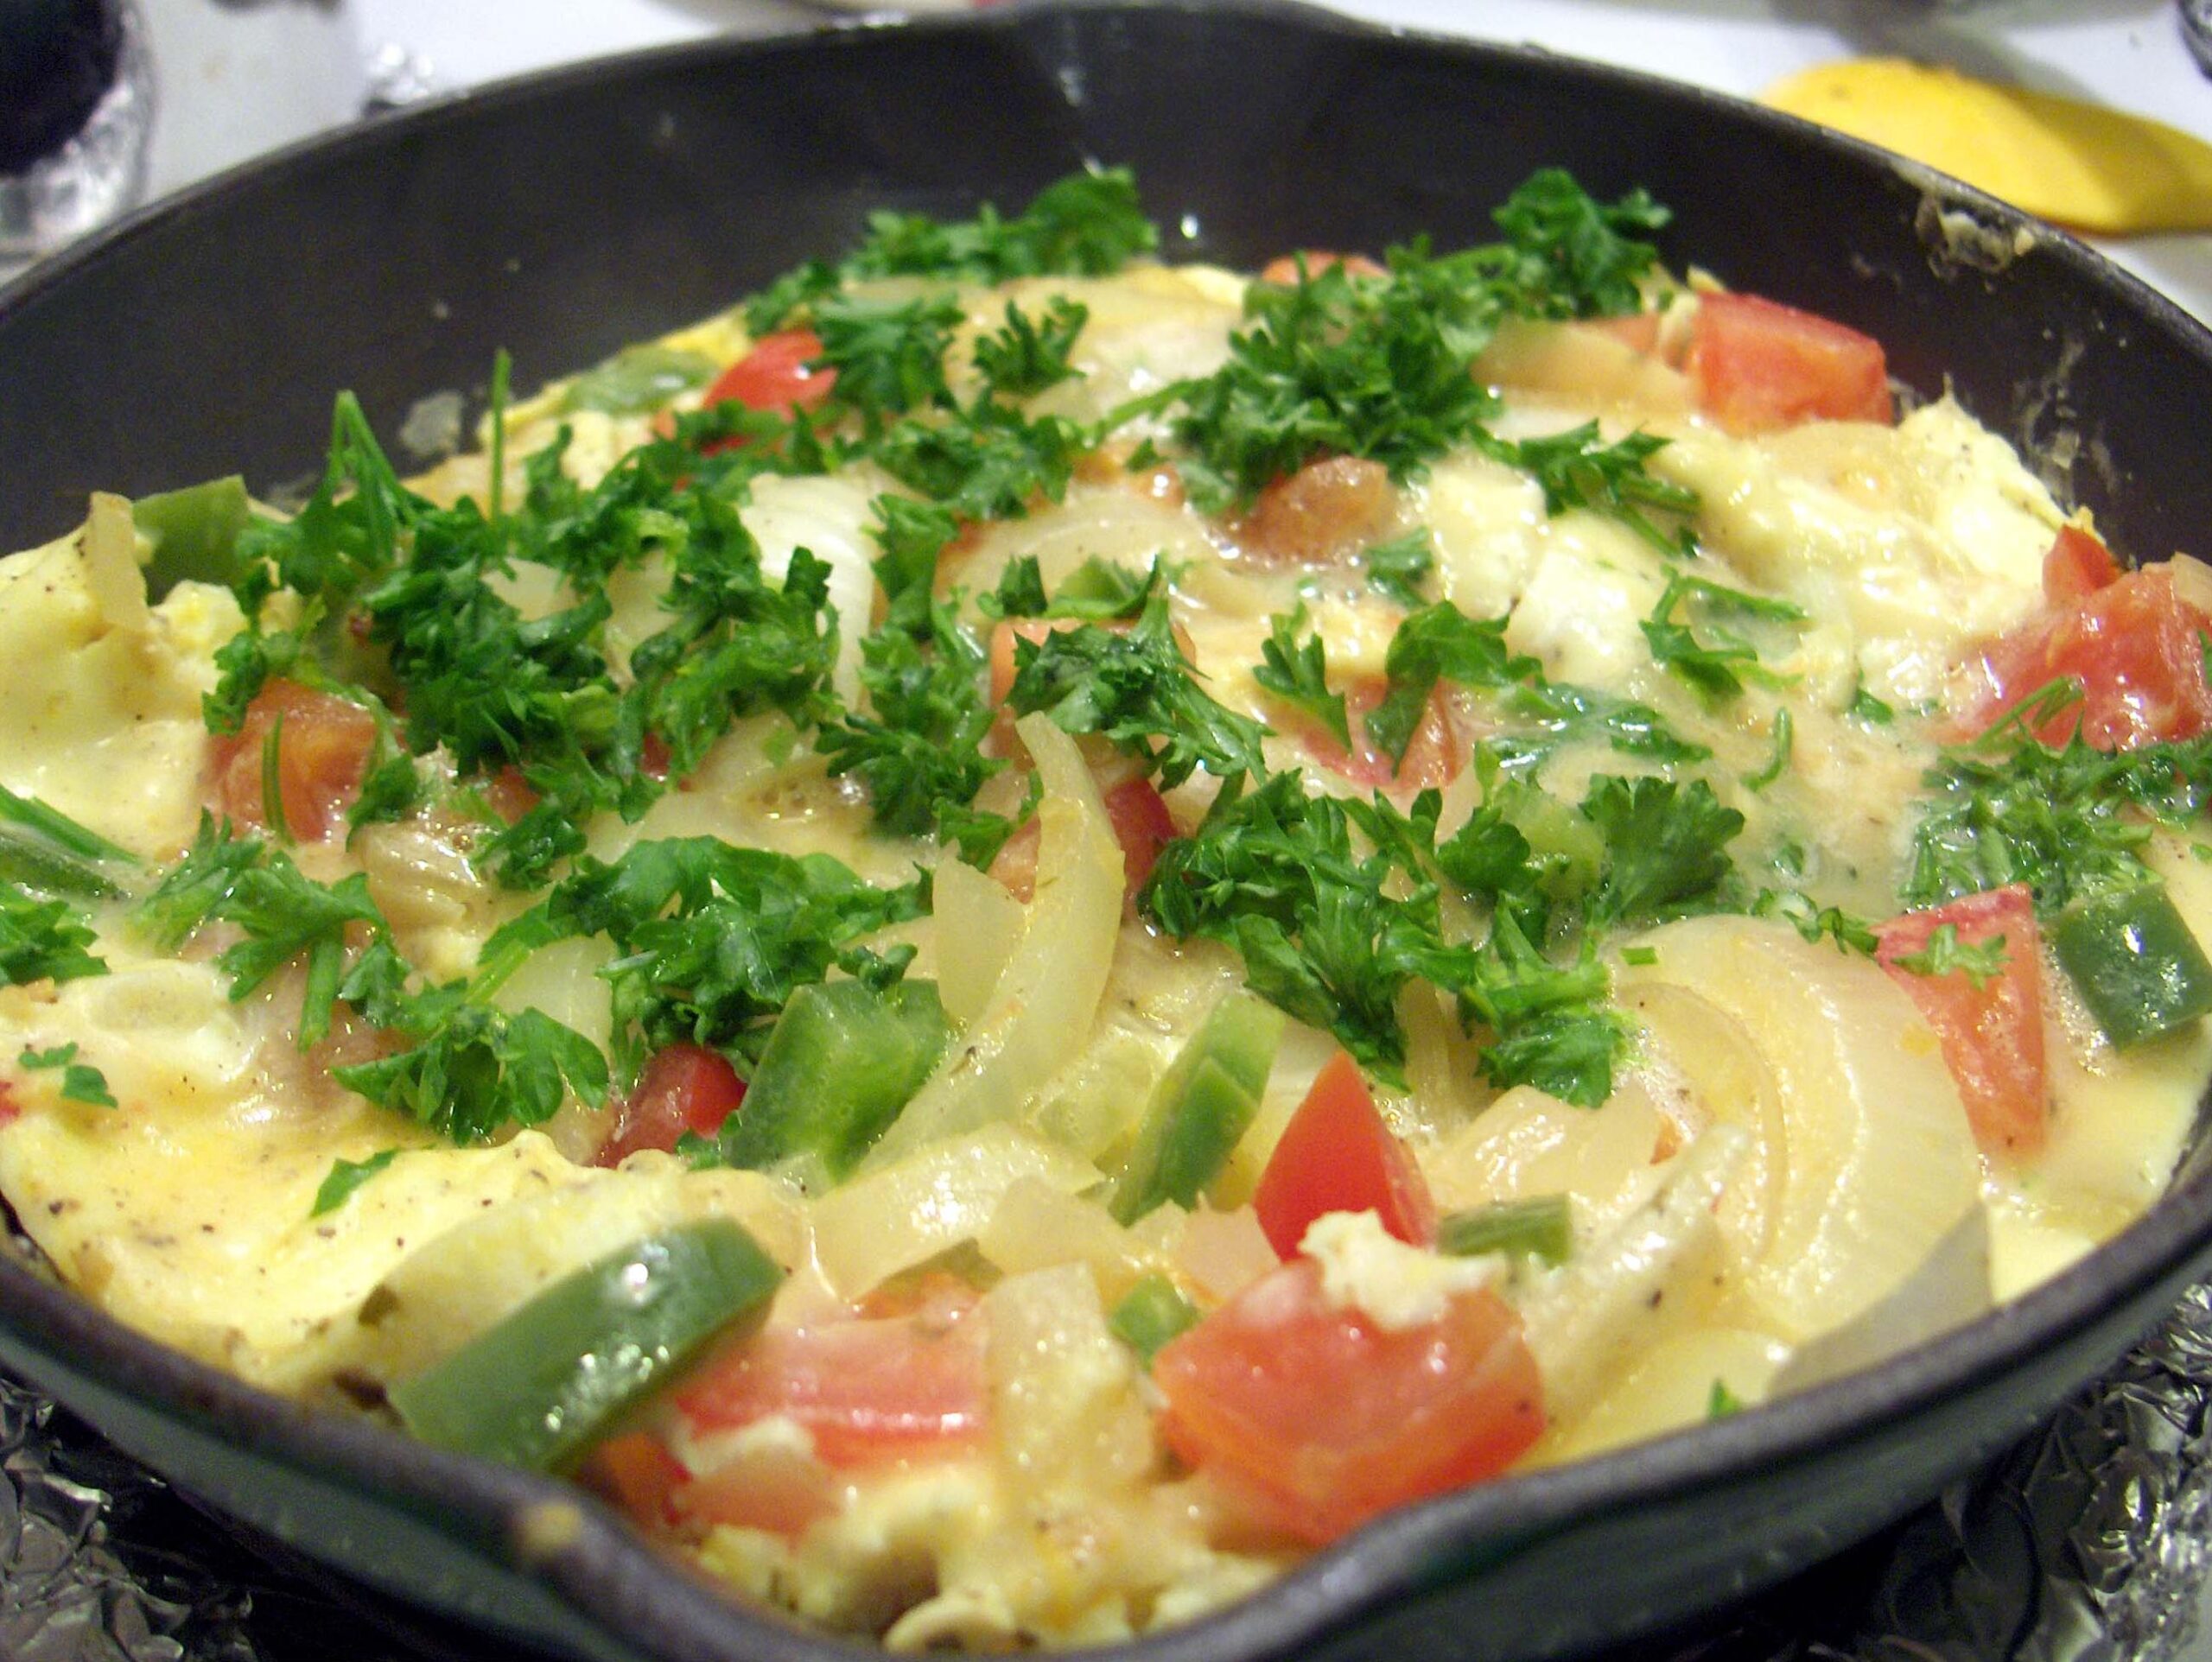  Your taste buds will dance with joy when you try this Menhaden omelette!